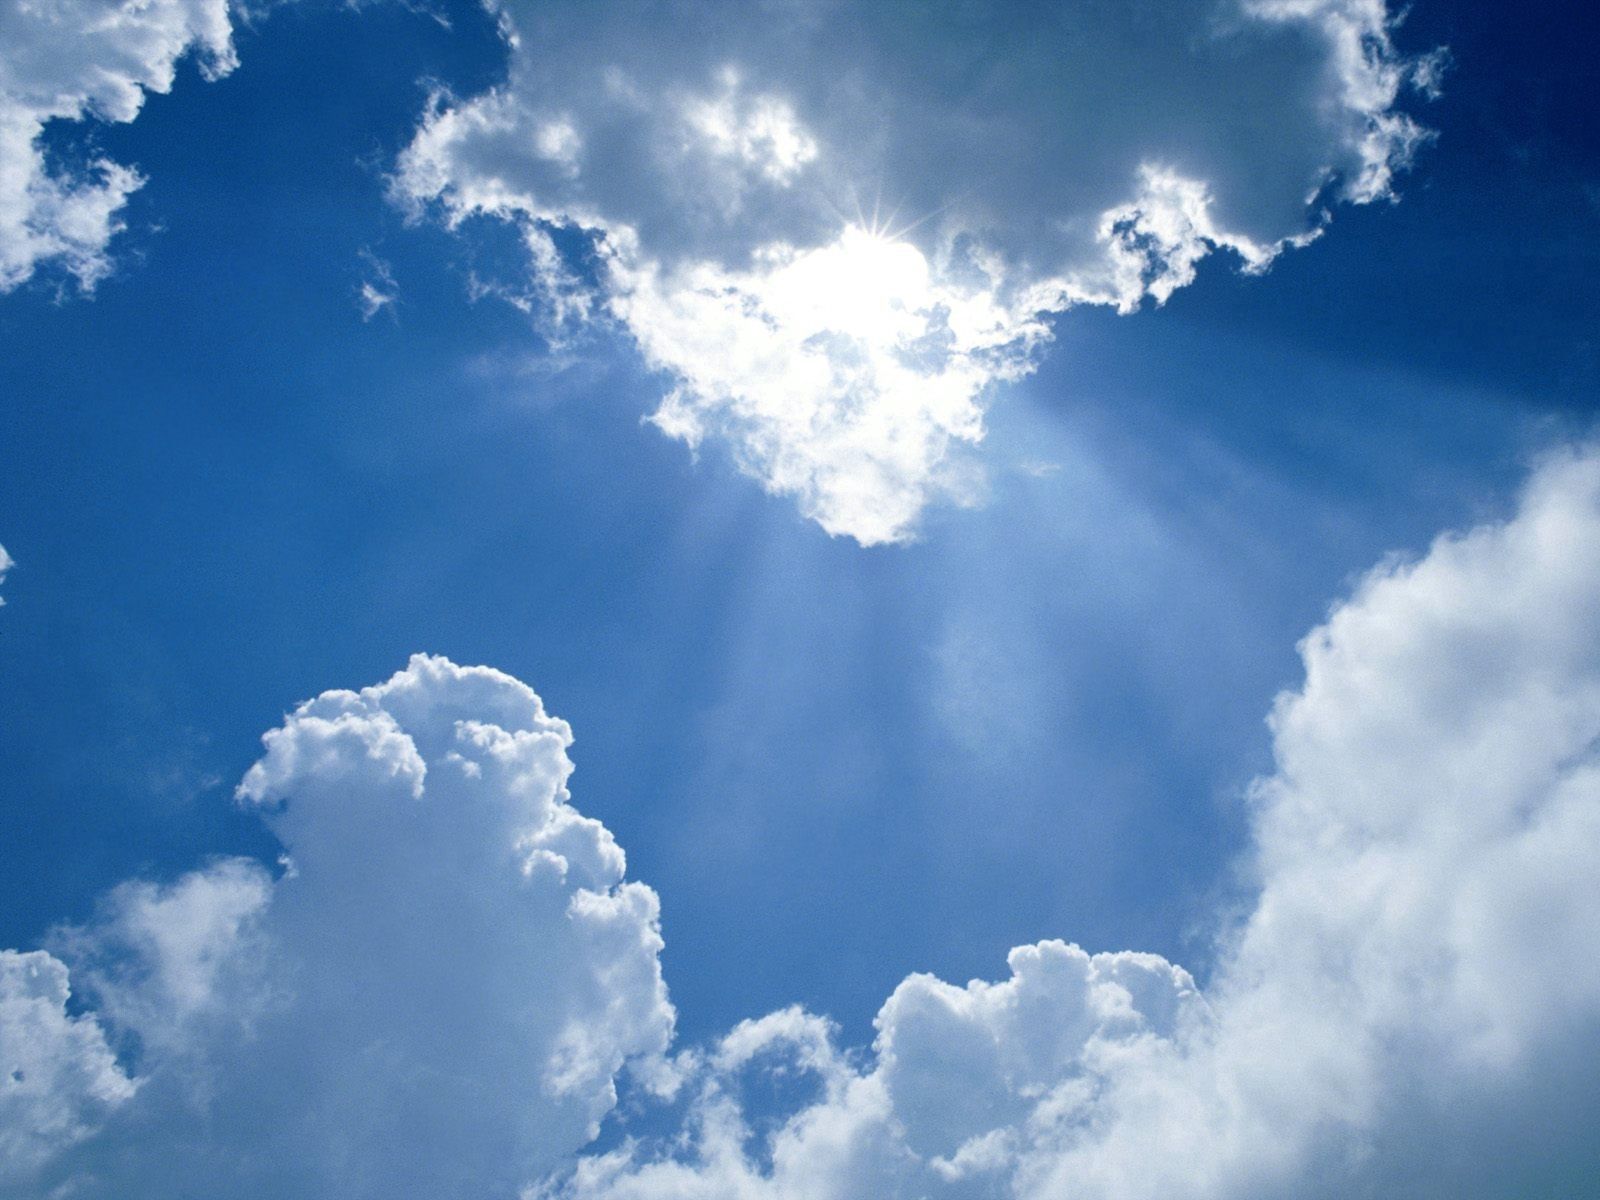 Download wallpaper 1600x1200 clouds, sky, sun, beams, day HD background